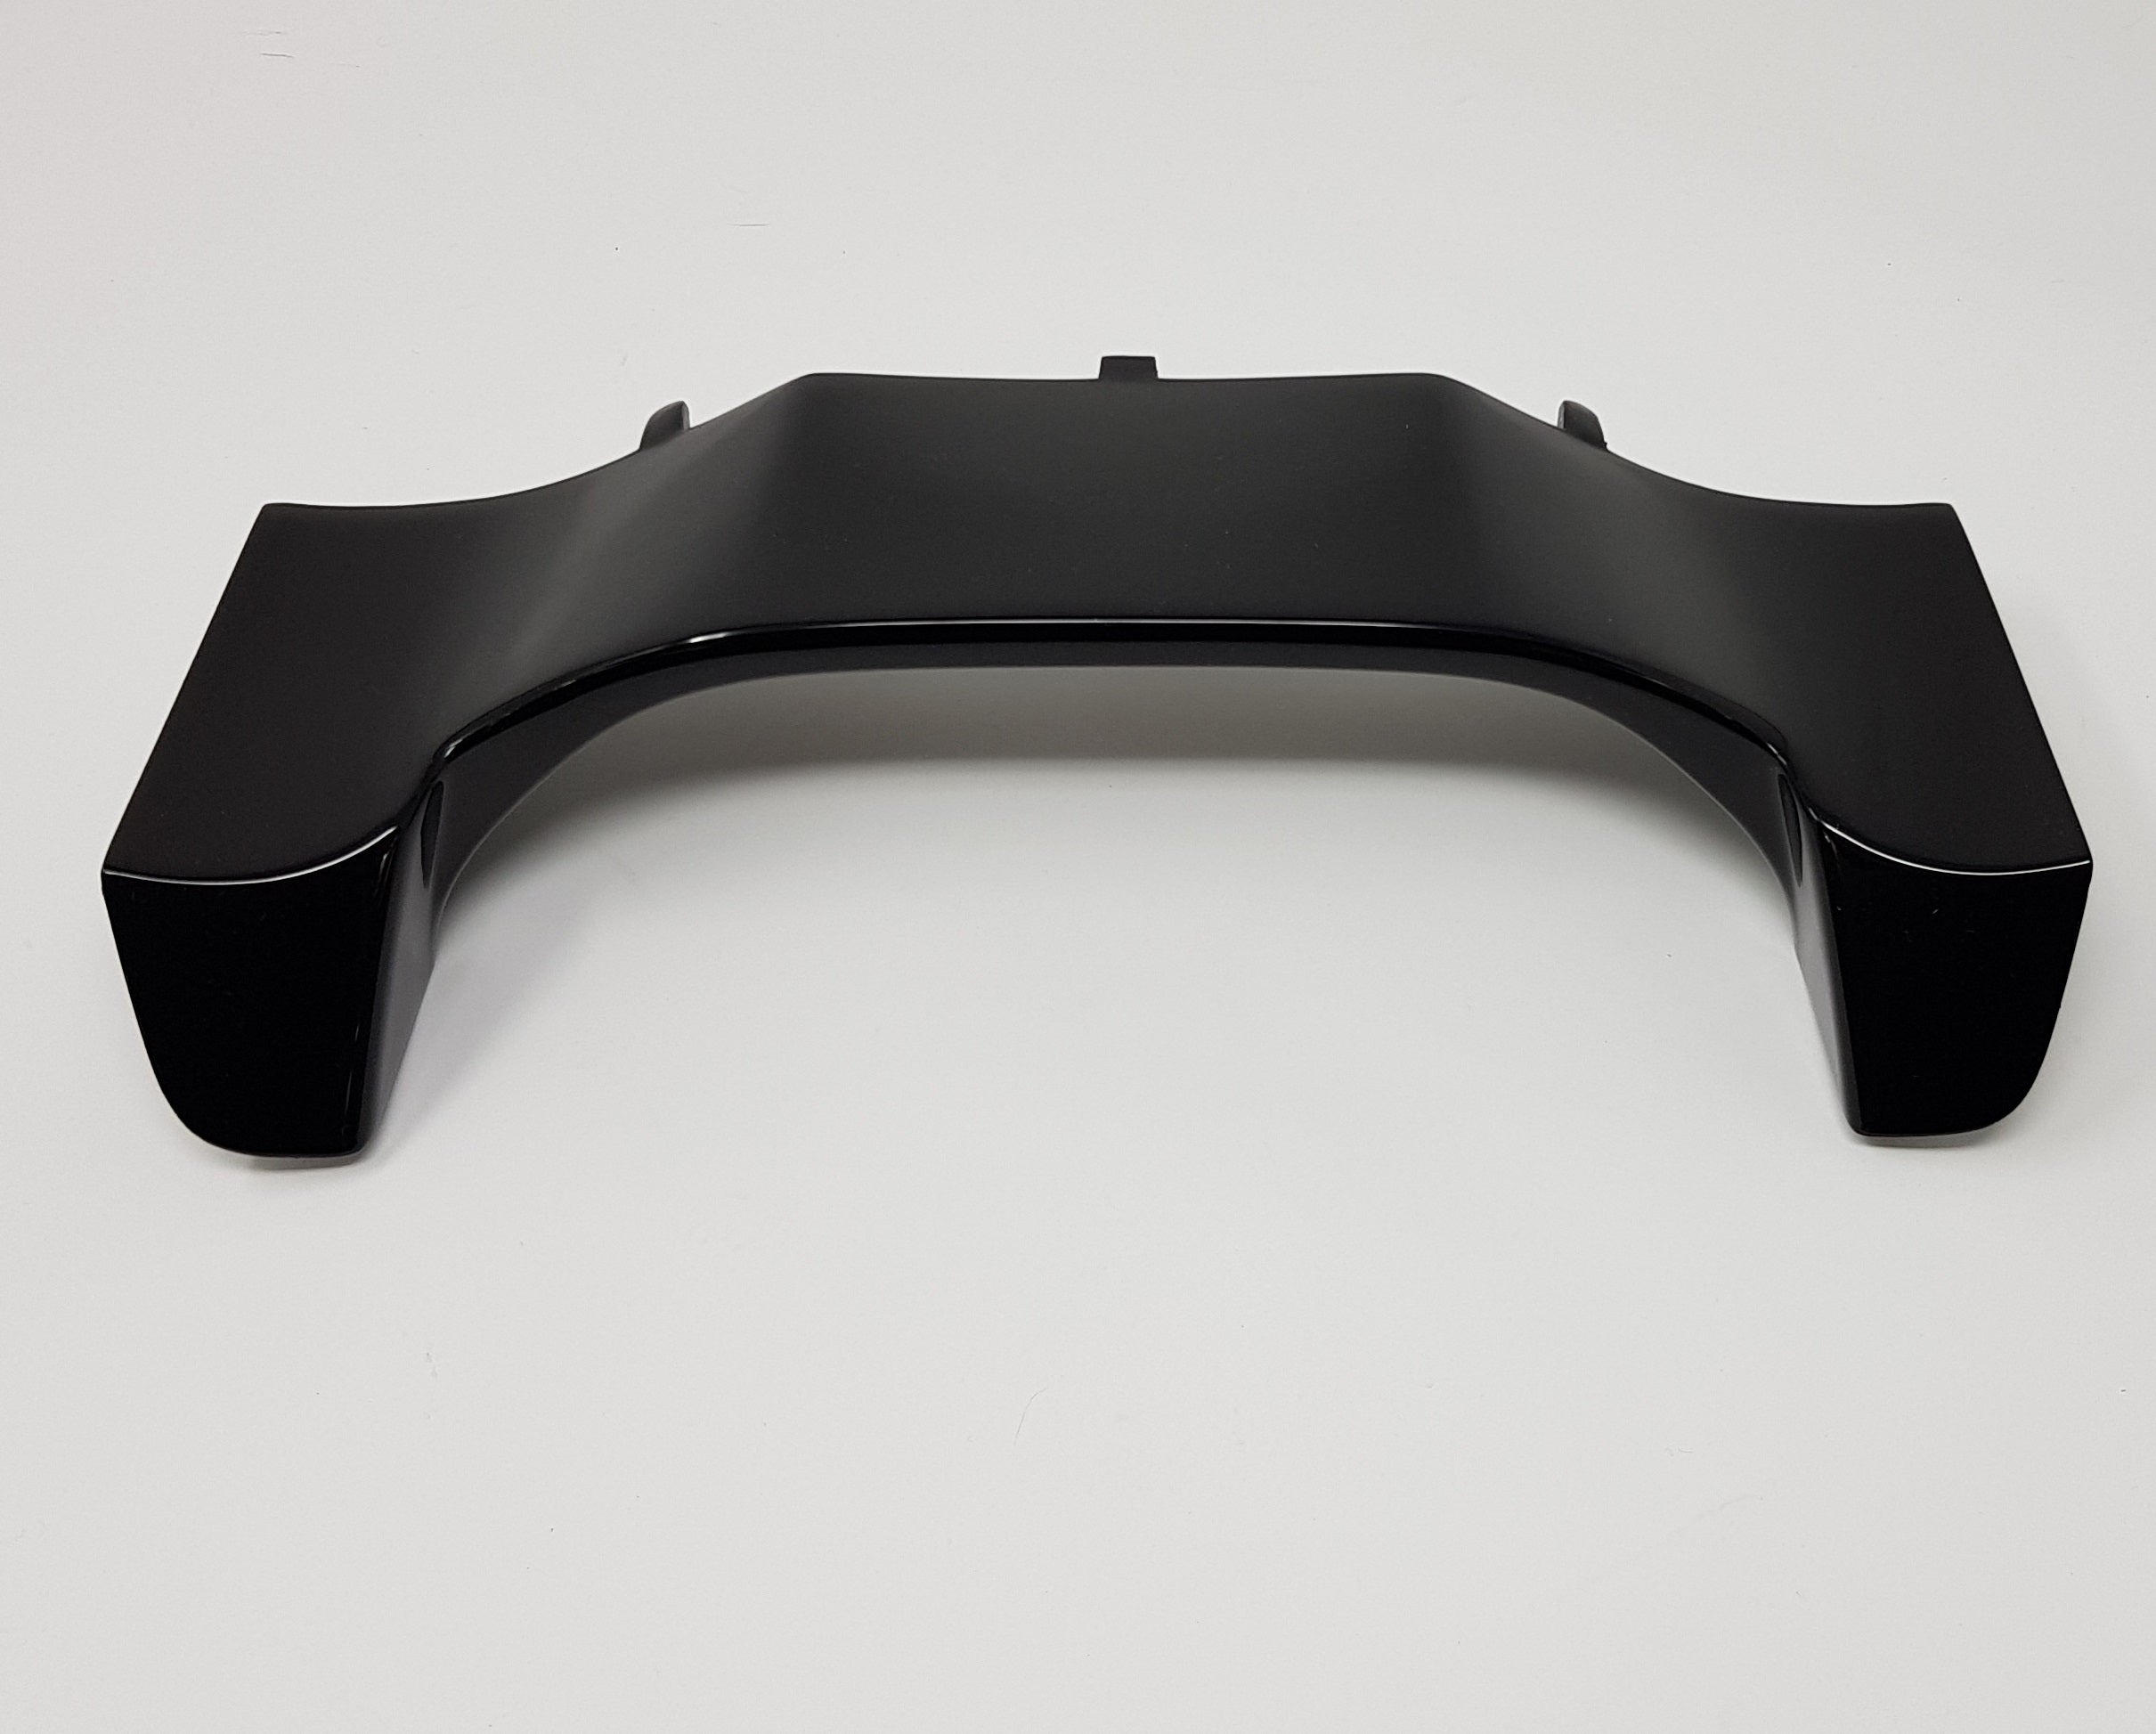 Genuine Ford Main Gauge Pod Trim Carbon Fibre - Mk3/3.5 Focus (Painted/Hydrodipped Finishes)